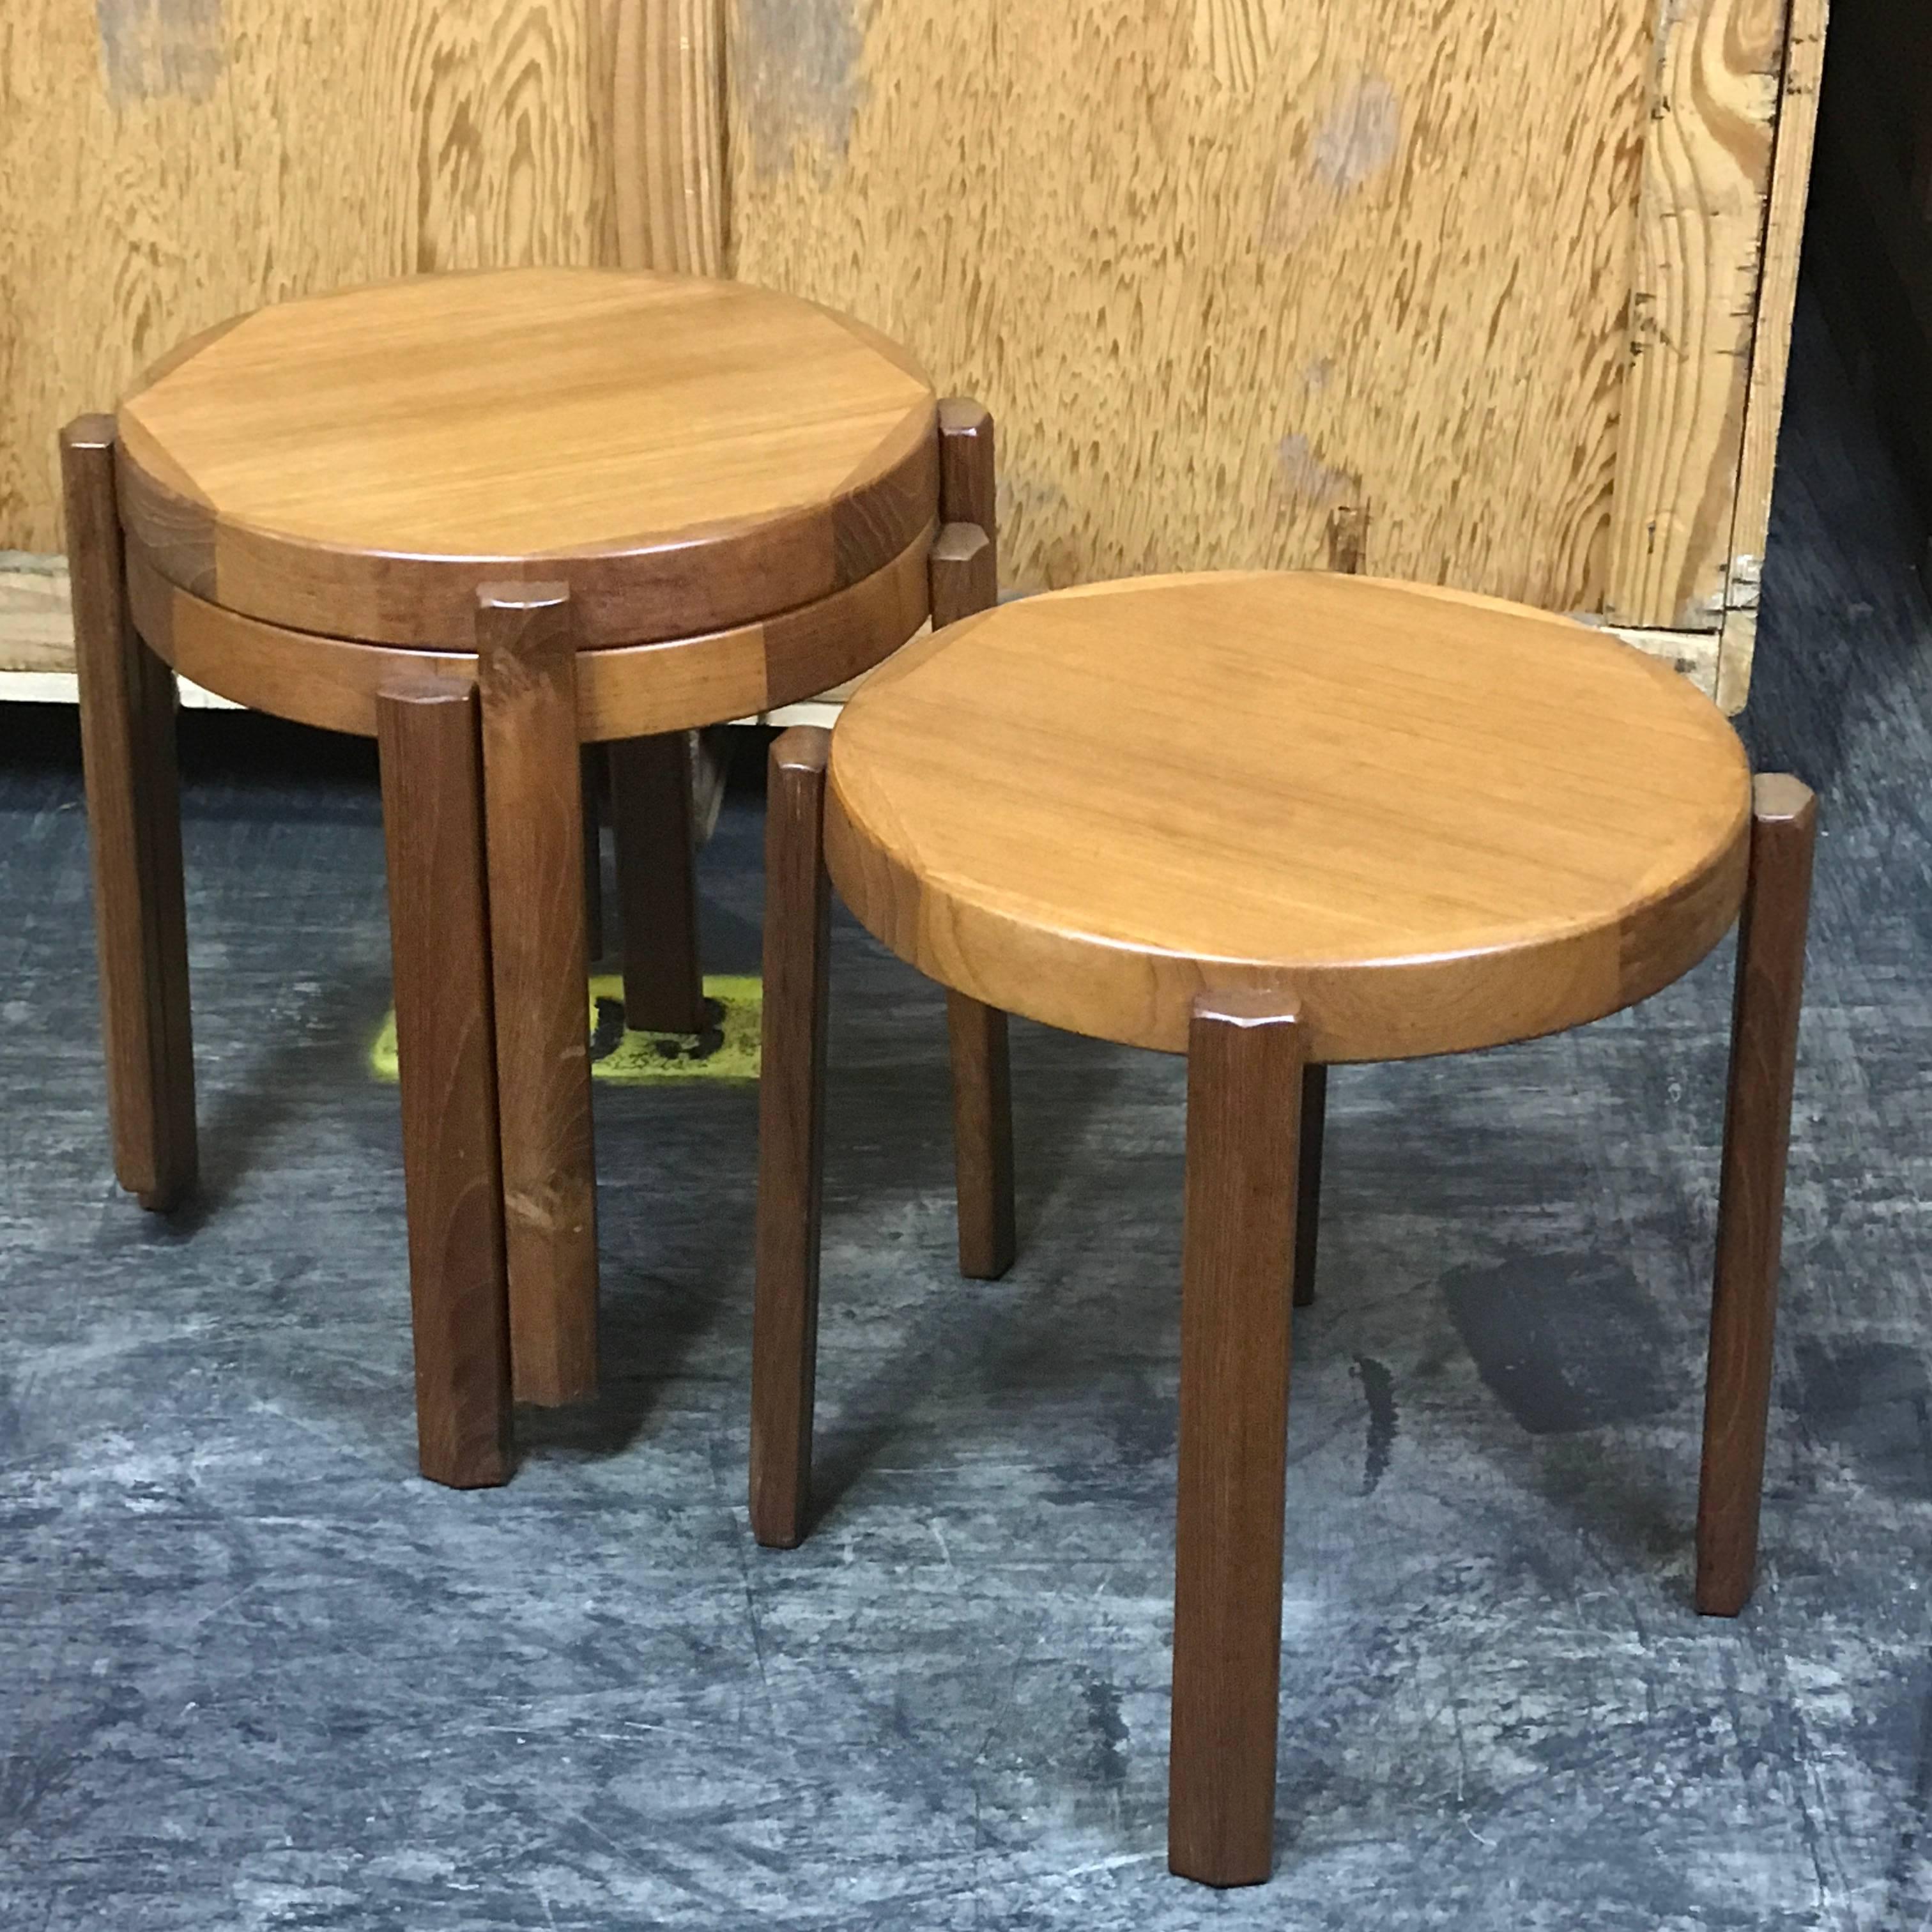 Great set of chunky Danish Modern stacking circular tables or stools, Each one with inlaid tops and "Lug" column legs. As a set of three stacked tables the group measures 20.5" high. Each table has a 1.75-inch edge. Each individual